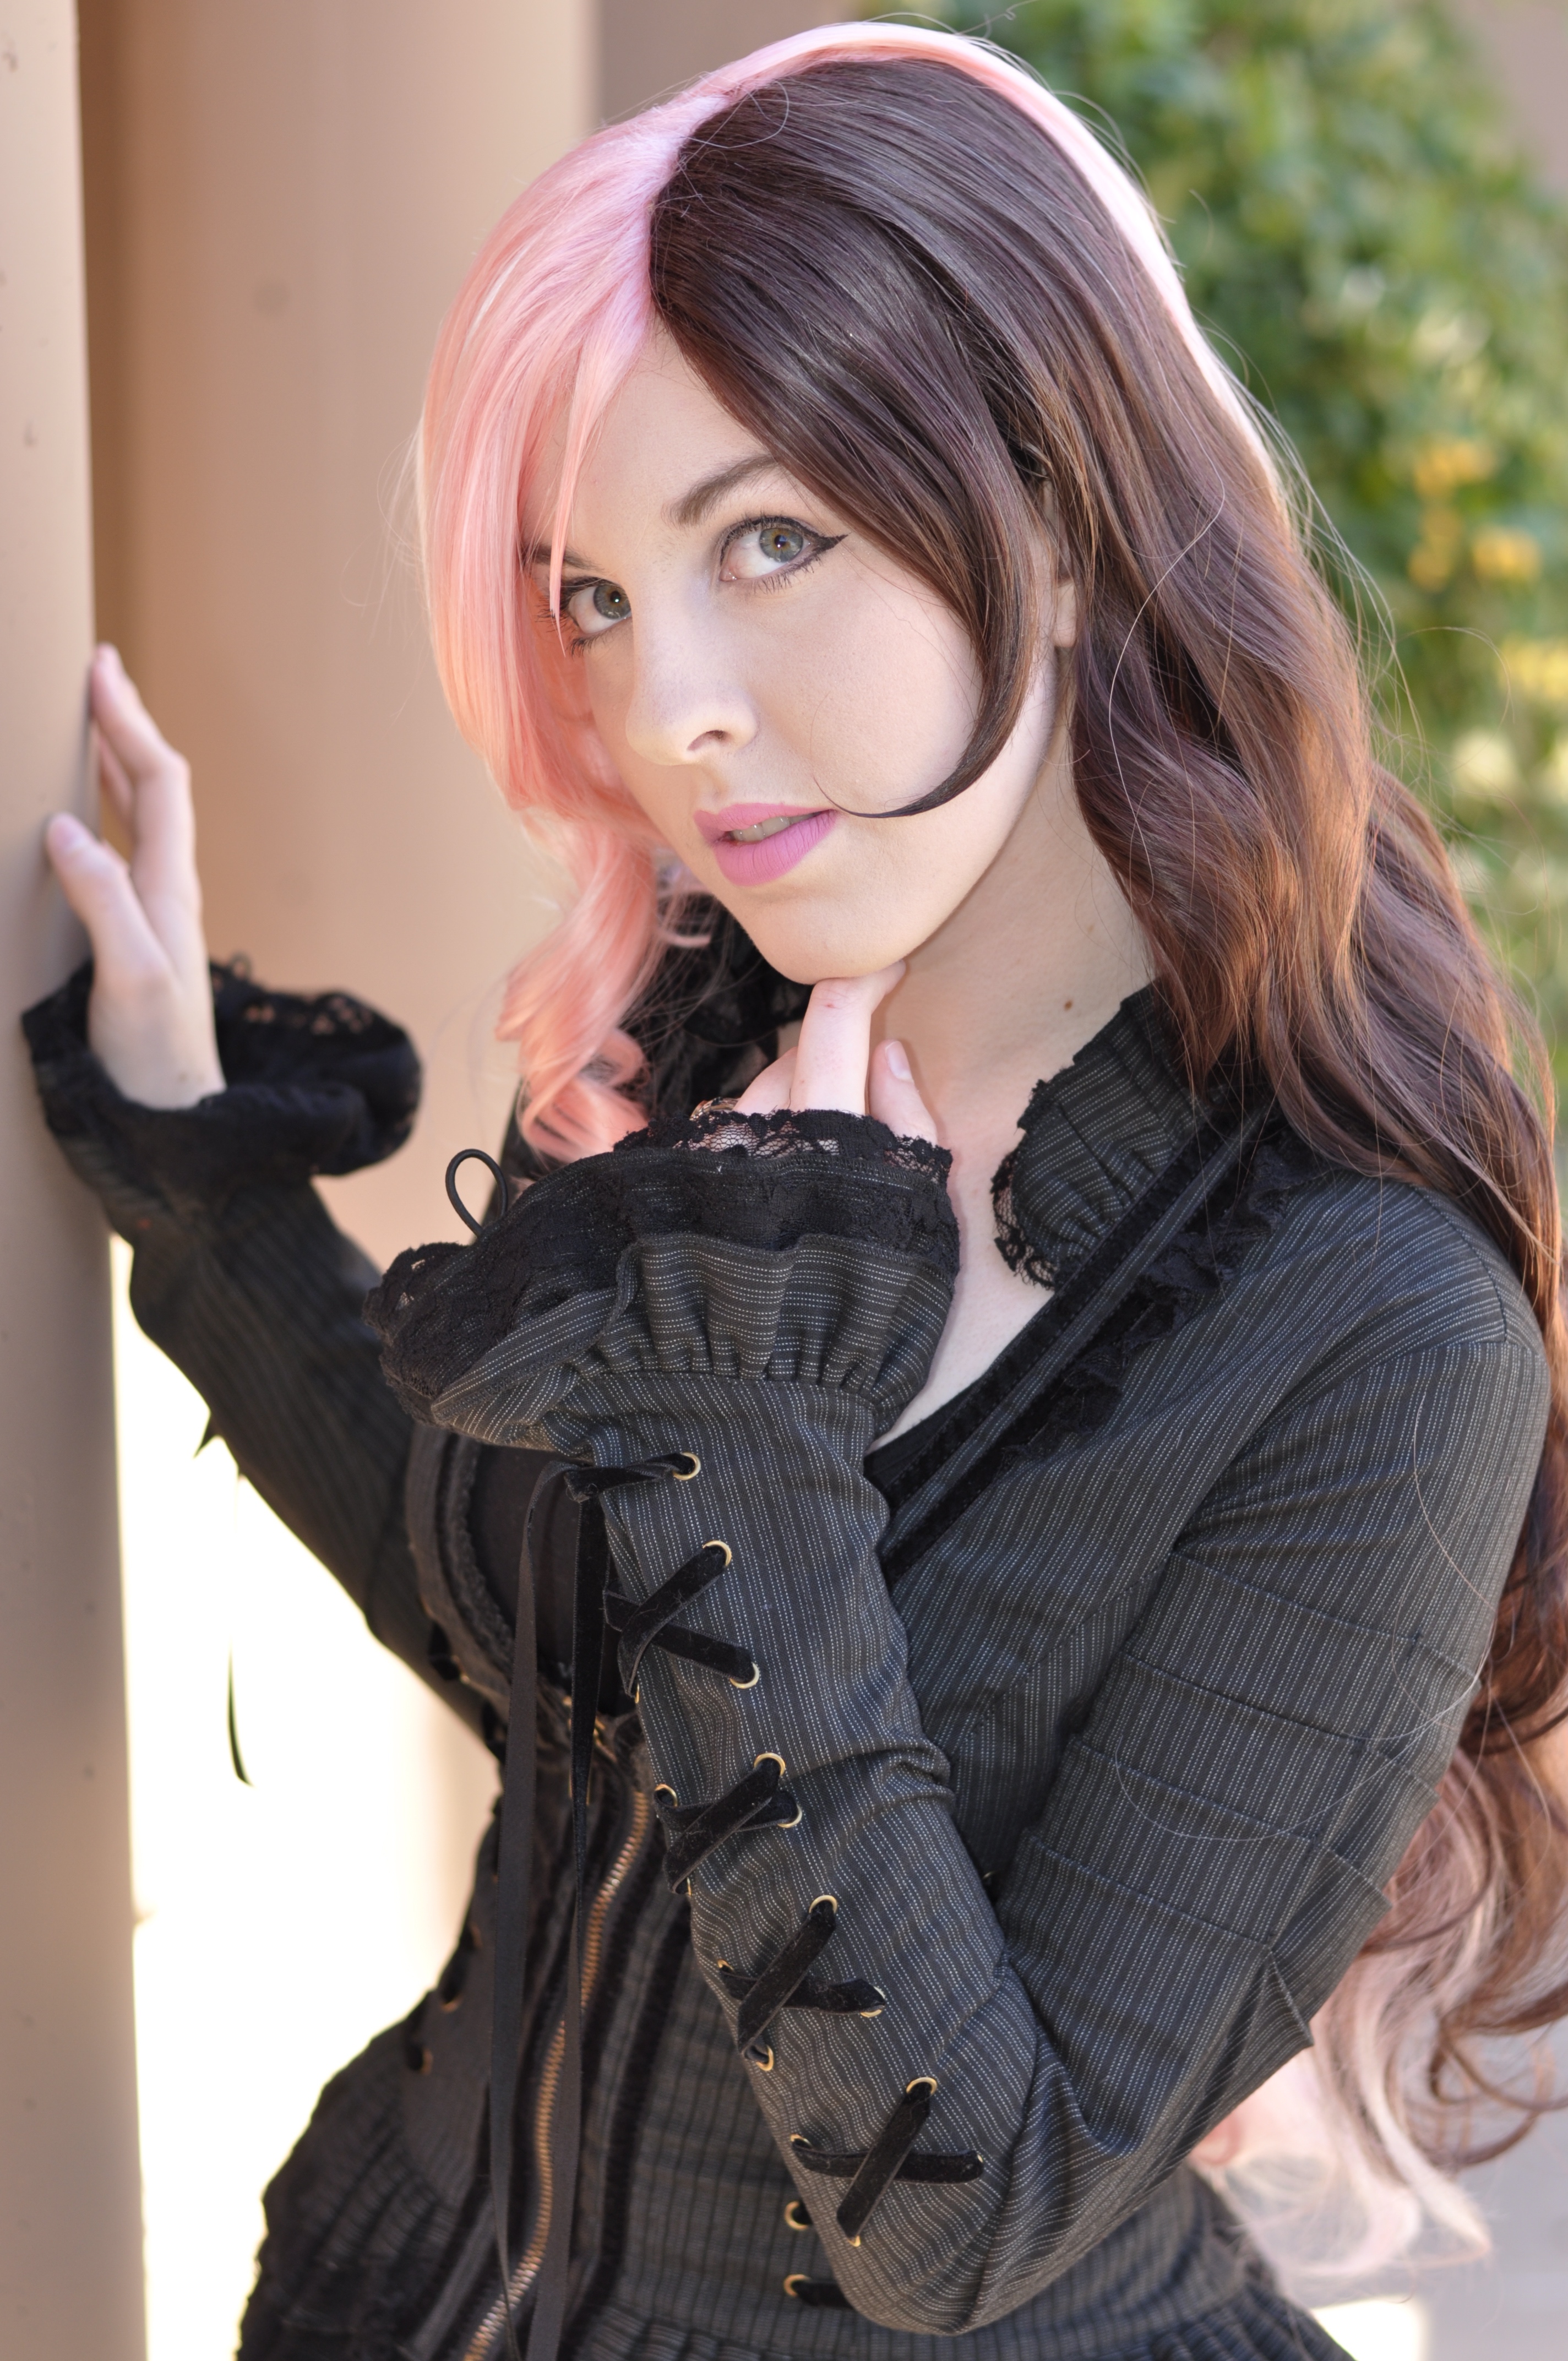 Emma Roberts as Neo in RWBY